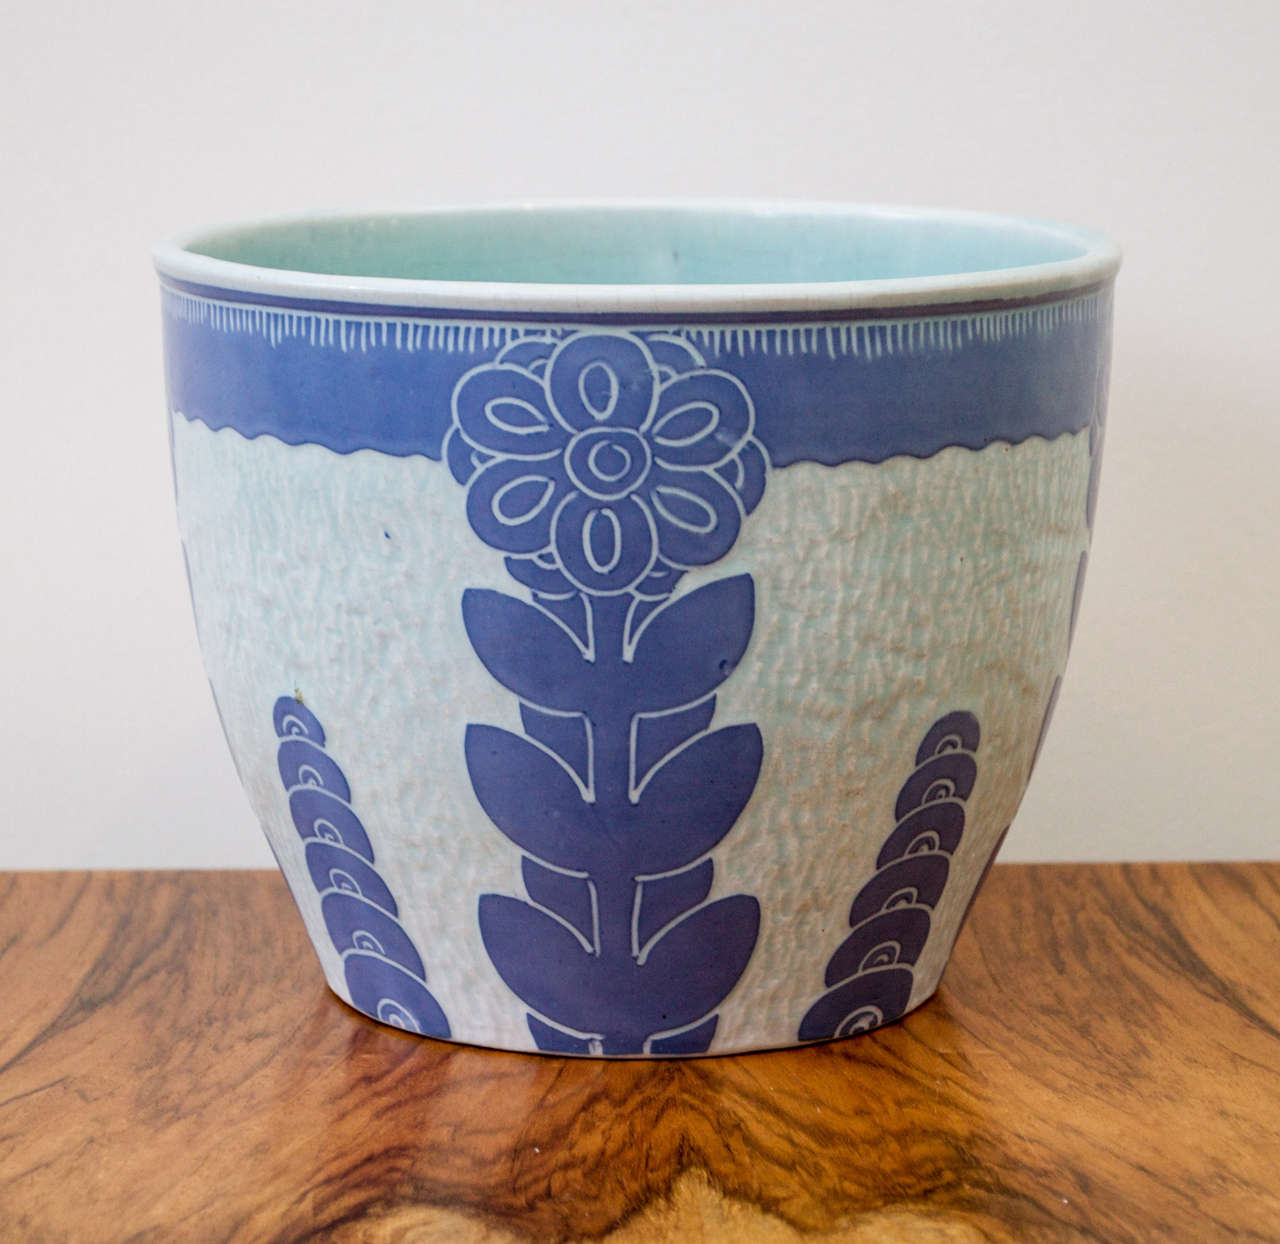 an Art Nuevo Pot by Gustavsberg. Stylized botanical decoration in shades of blue. 1919, marked.